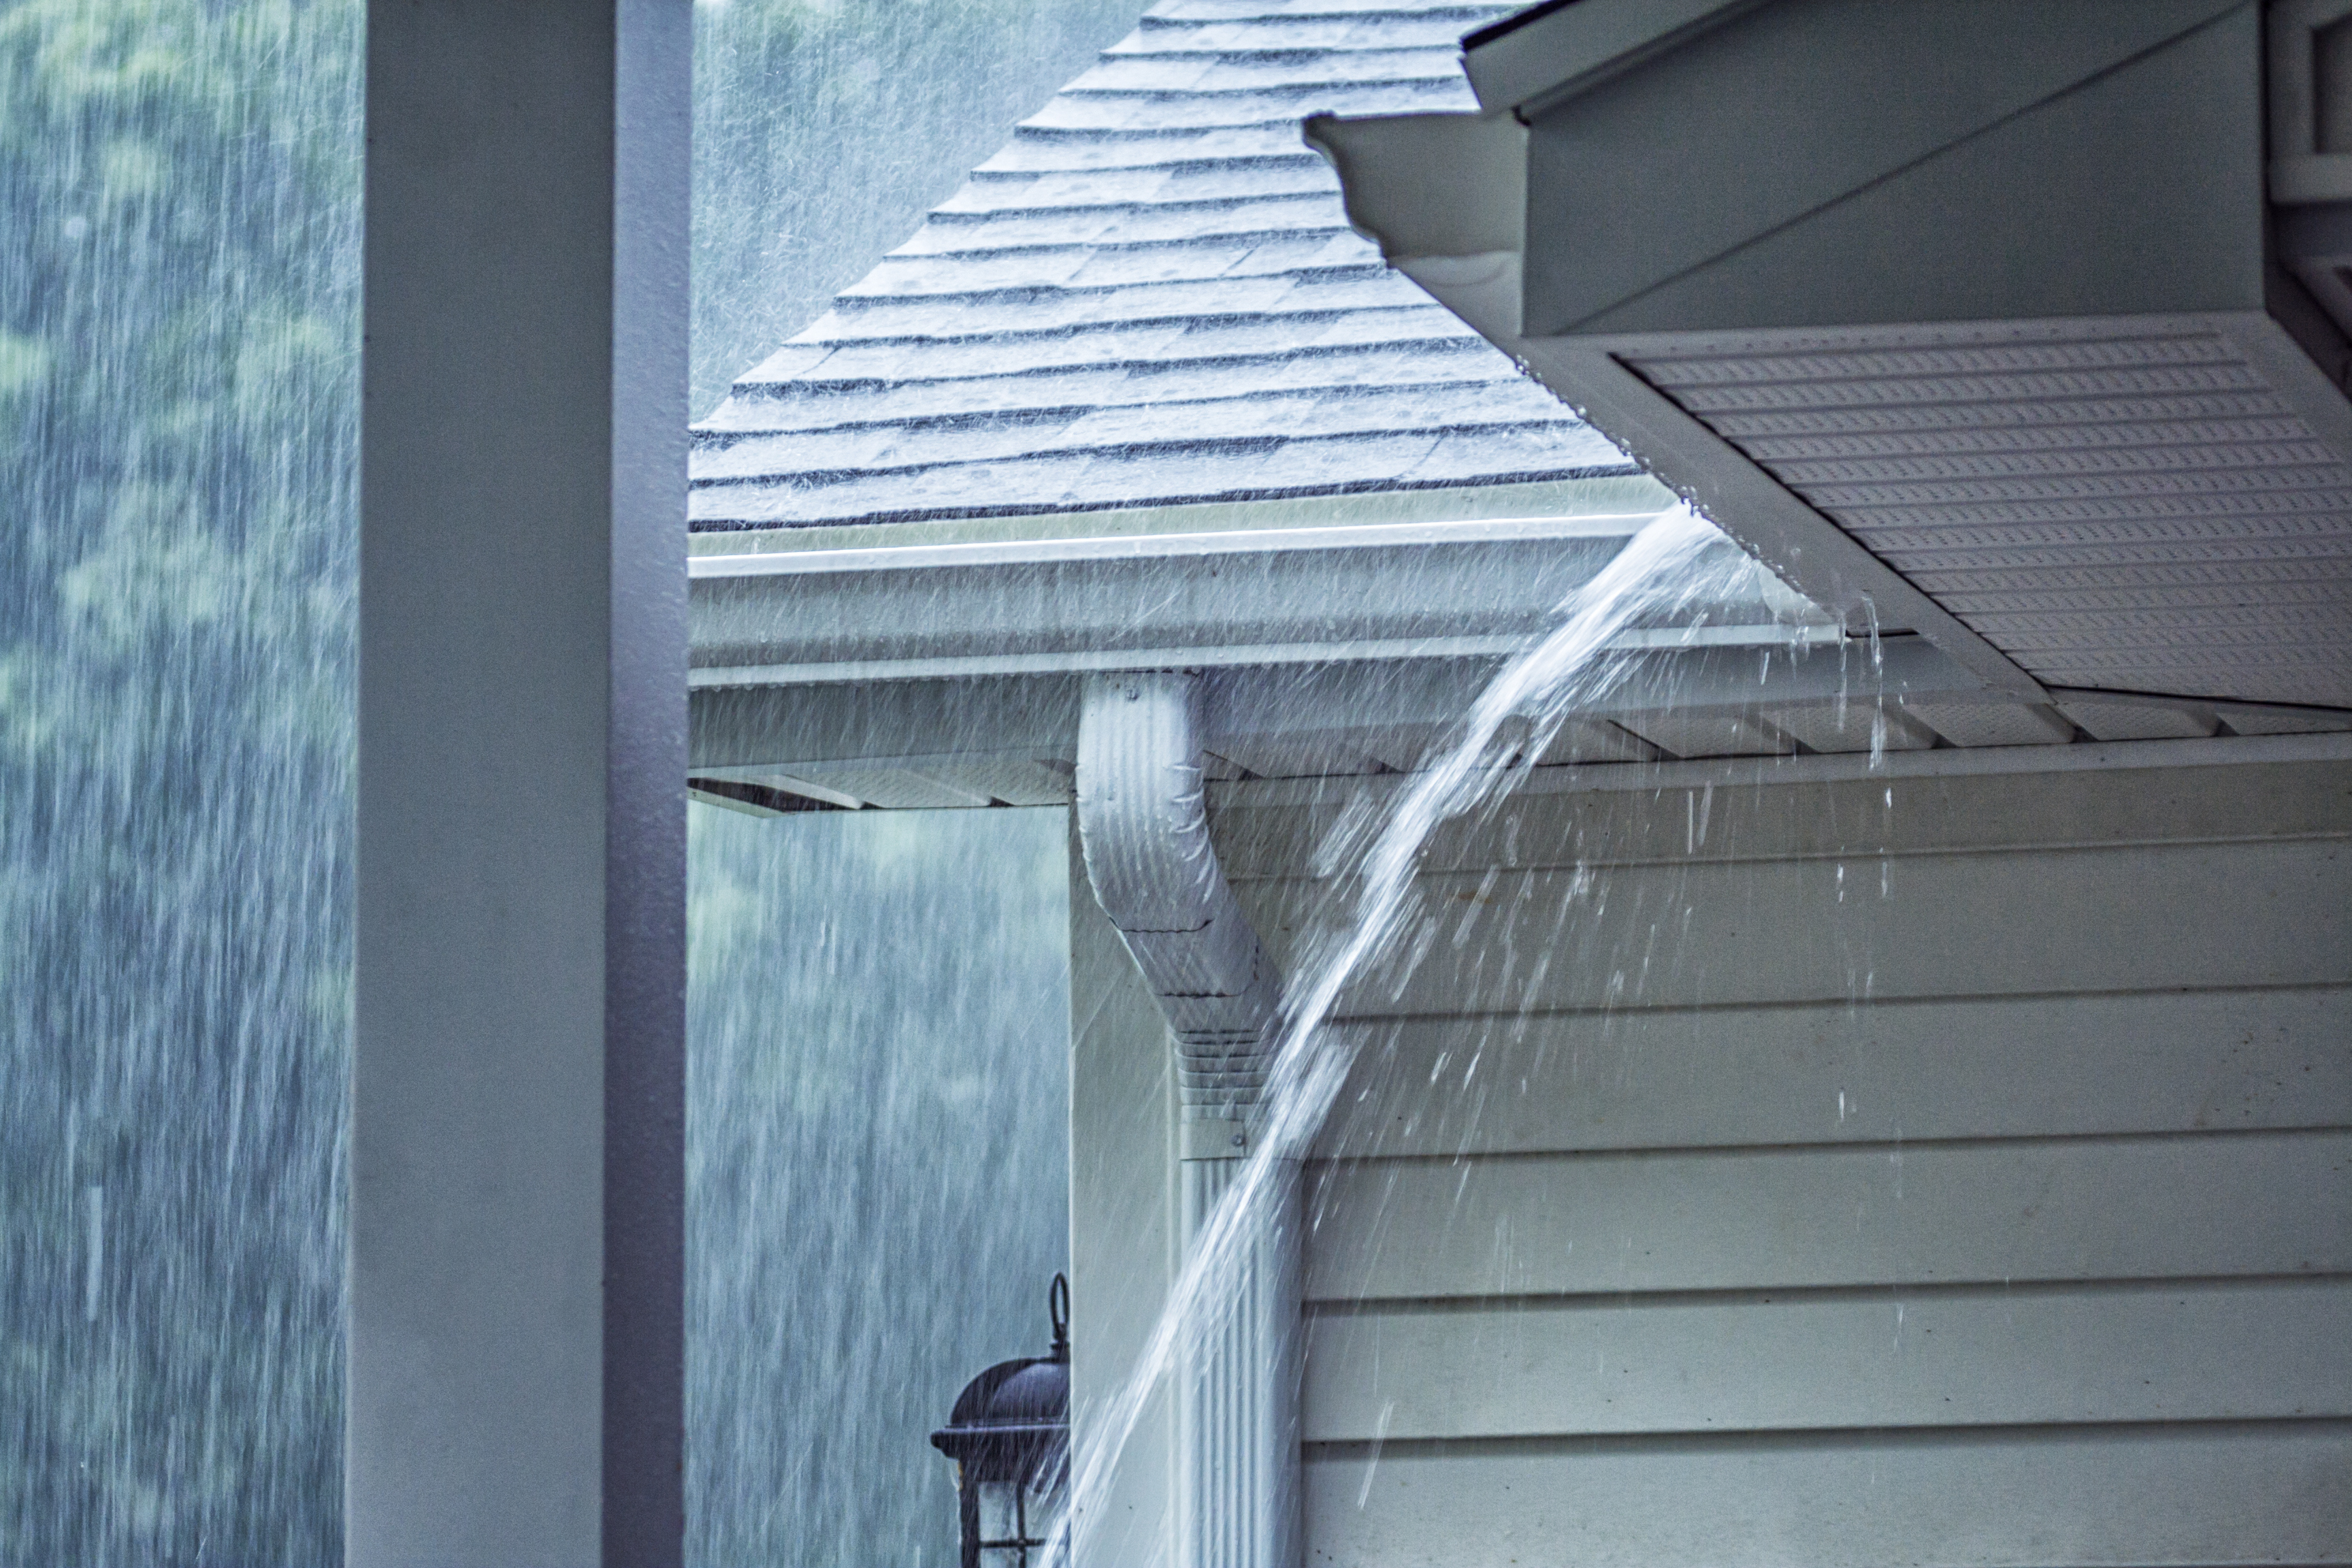 Rain Pouring Out of Gutters